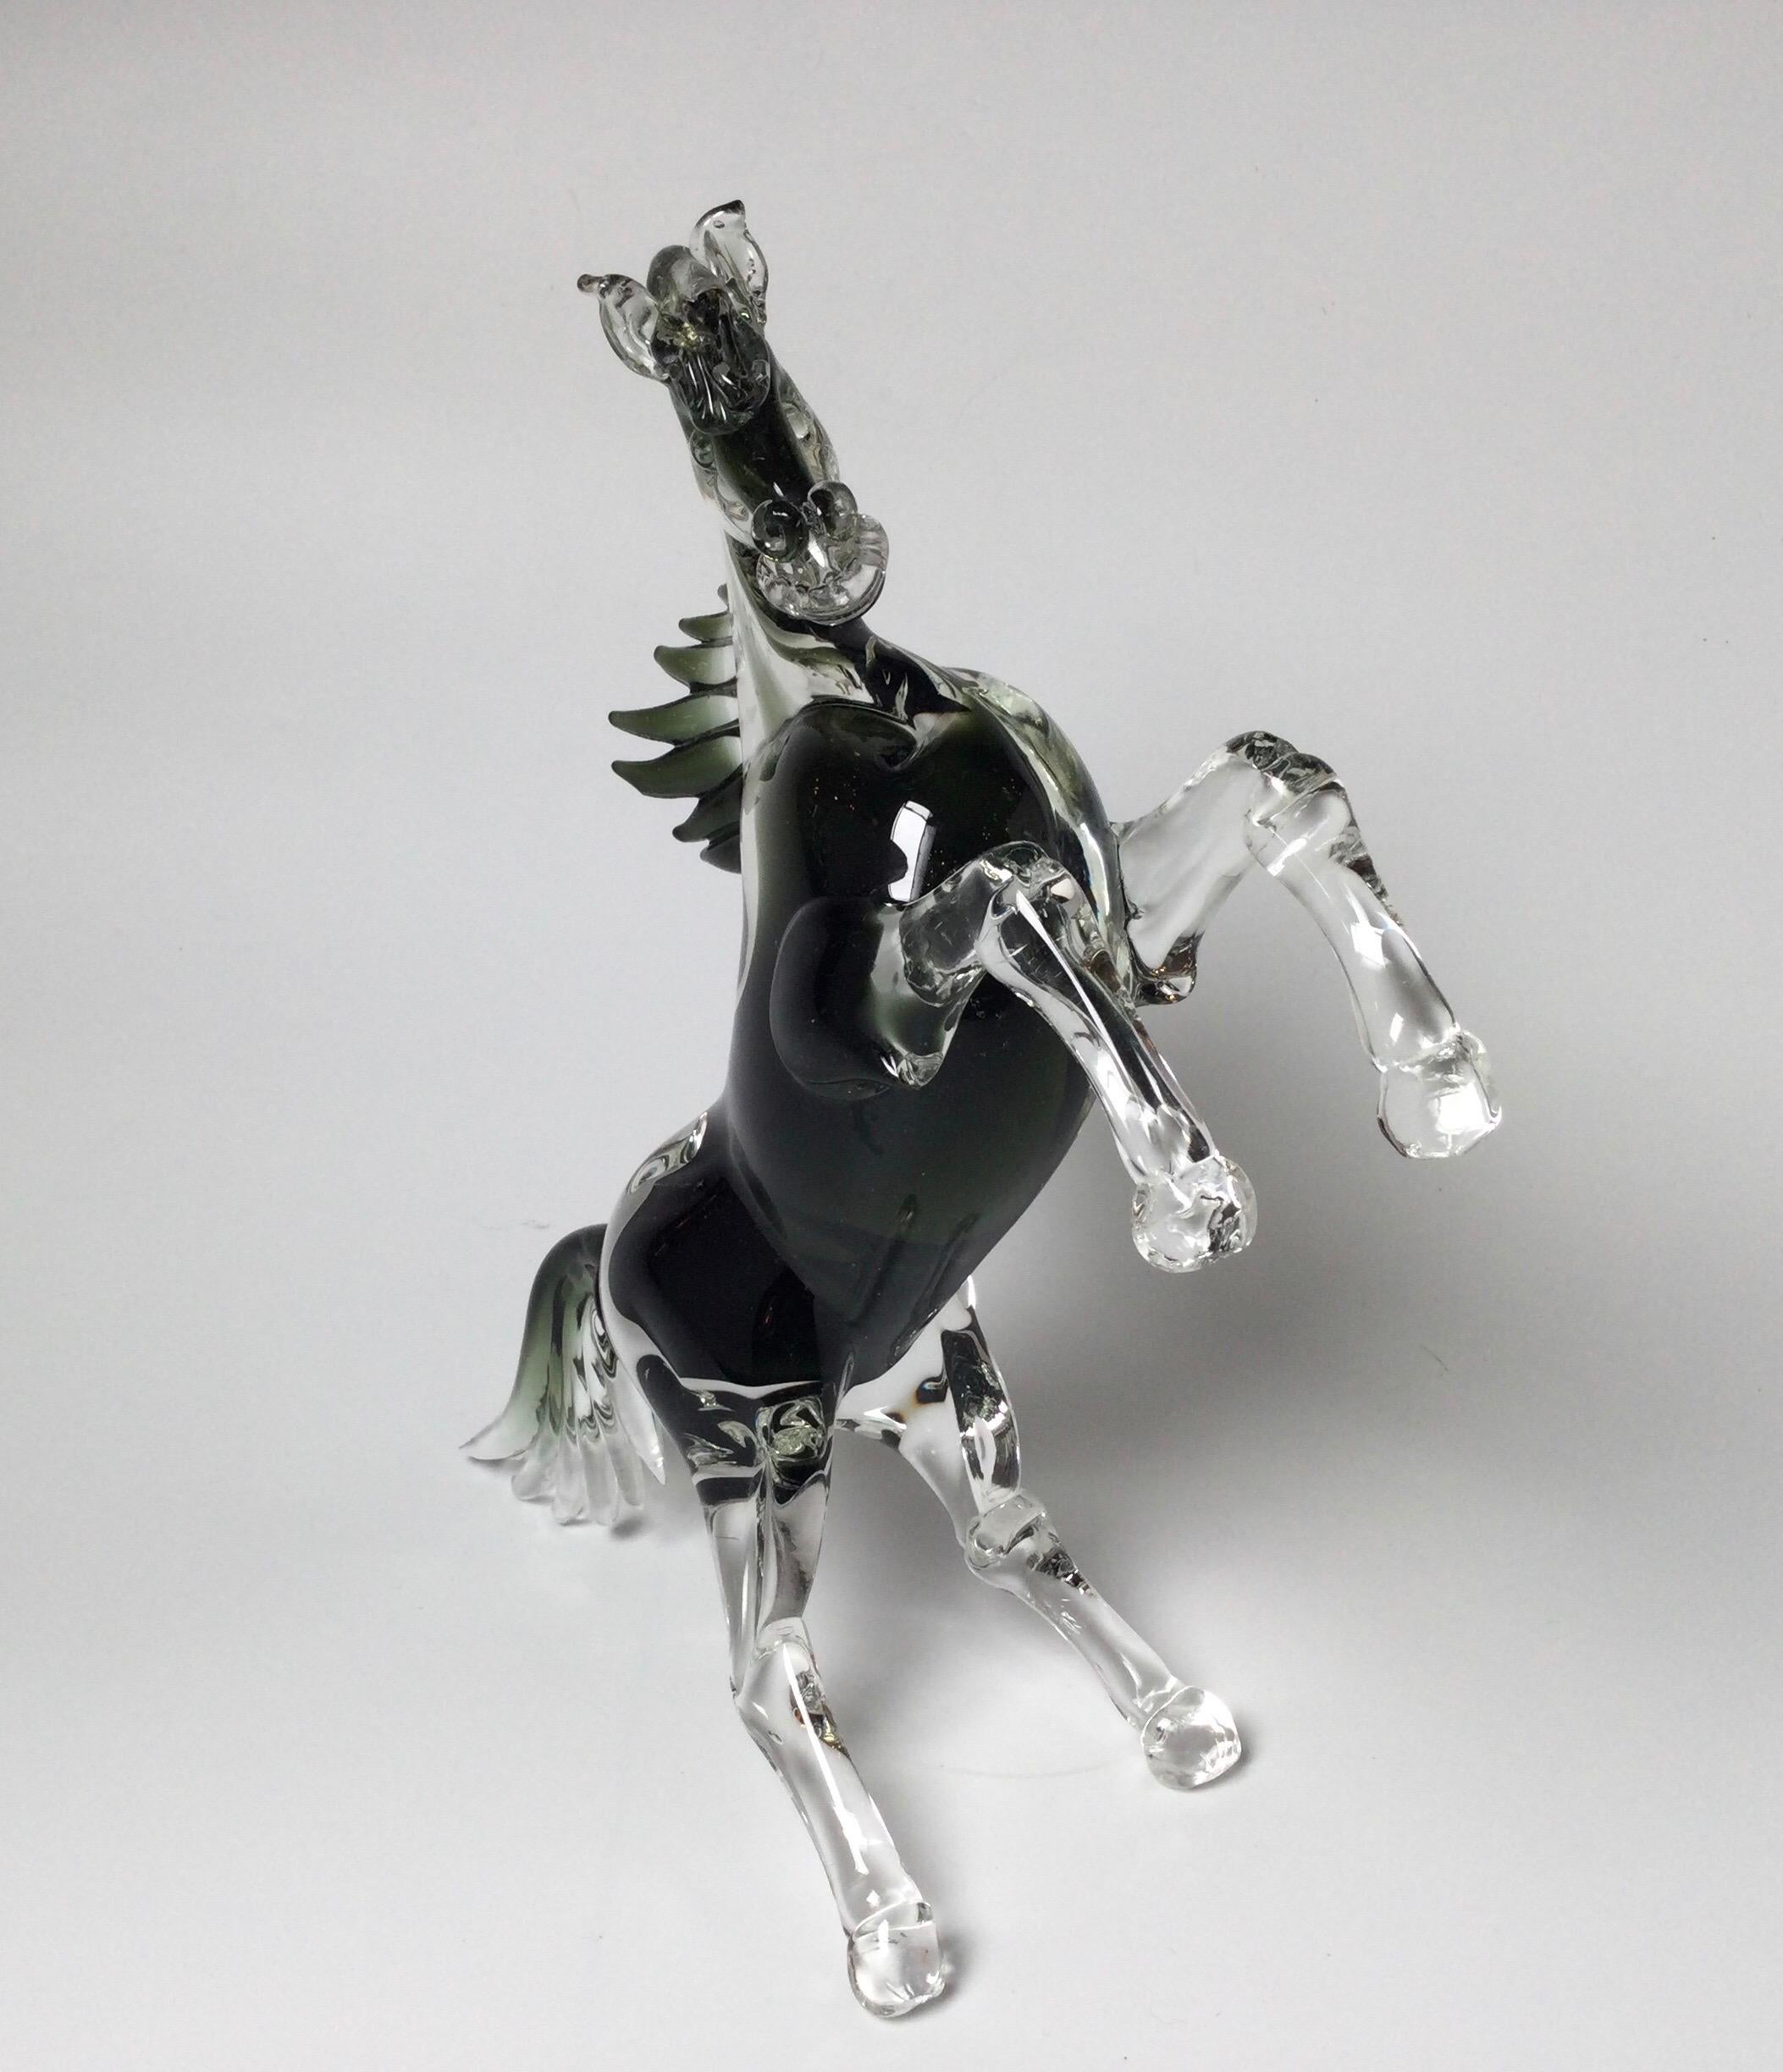 Hand made Murano glass horse sculpture with clear and smoky topaz color. The horse in a upright position with flowing mane and tale.